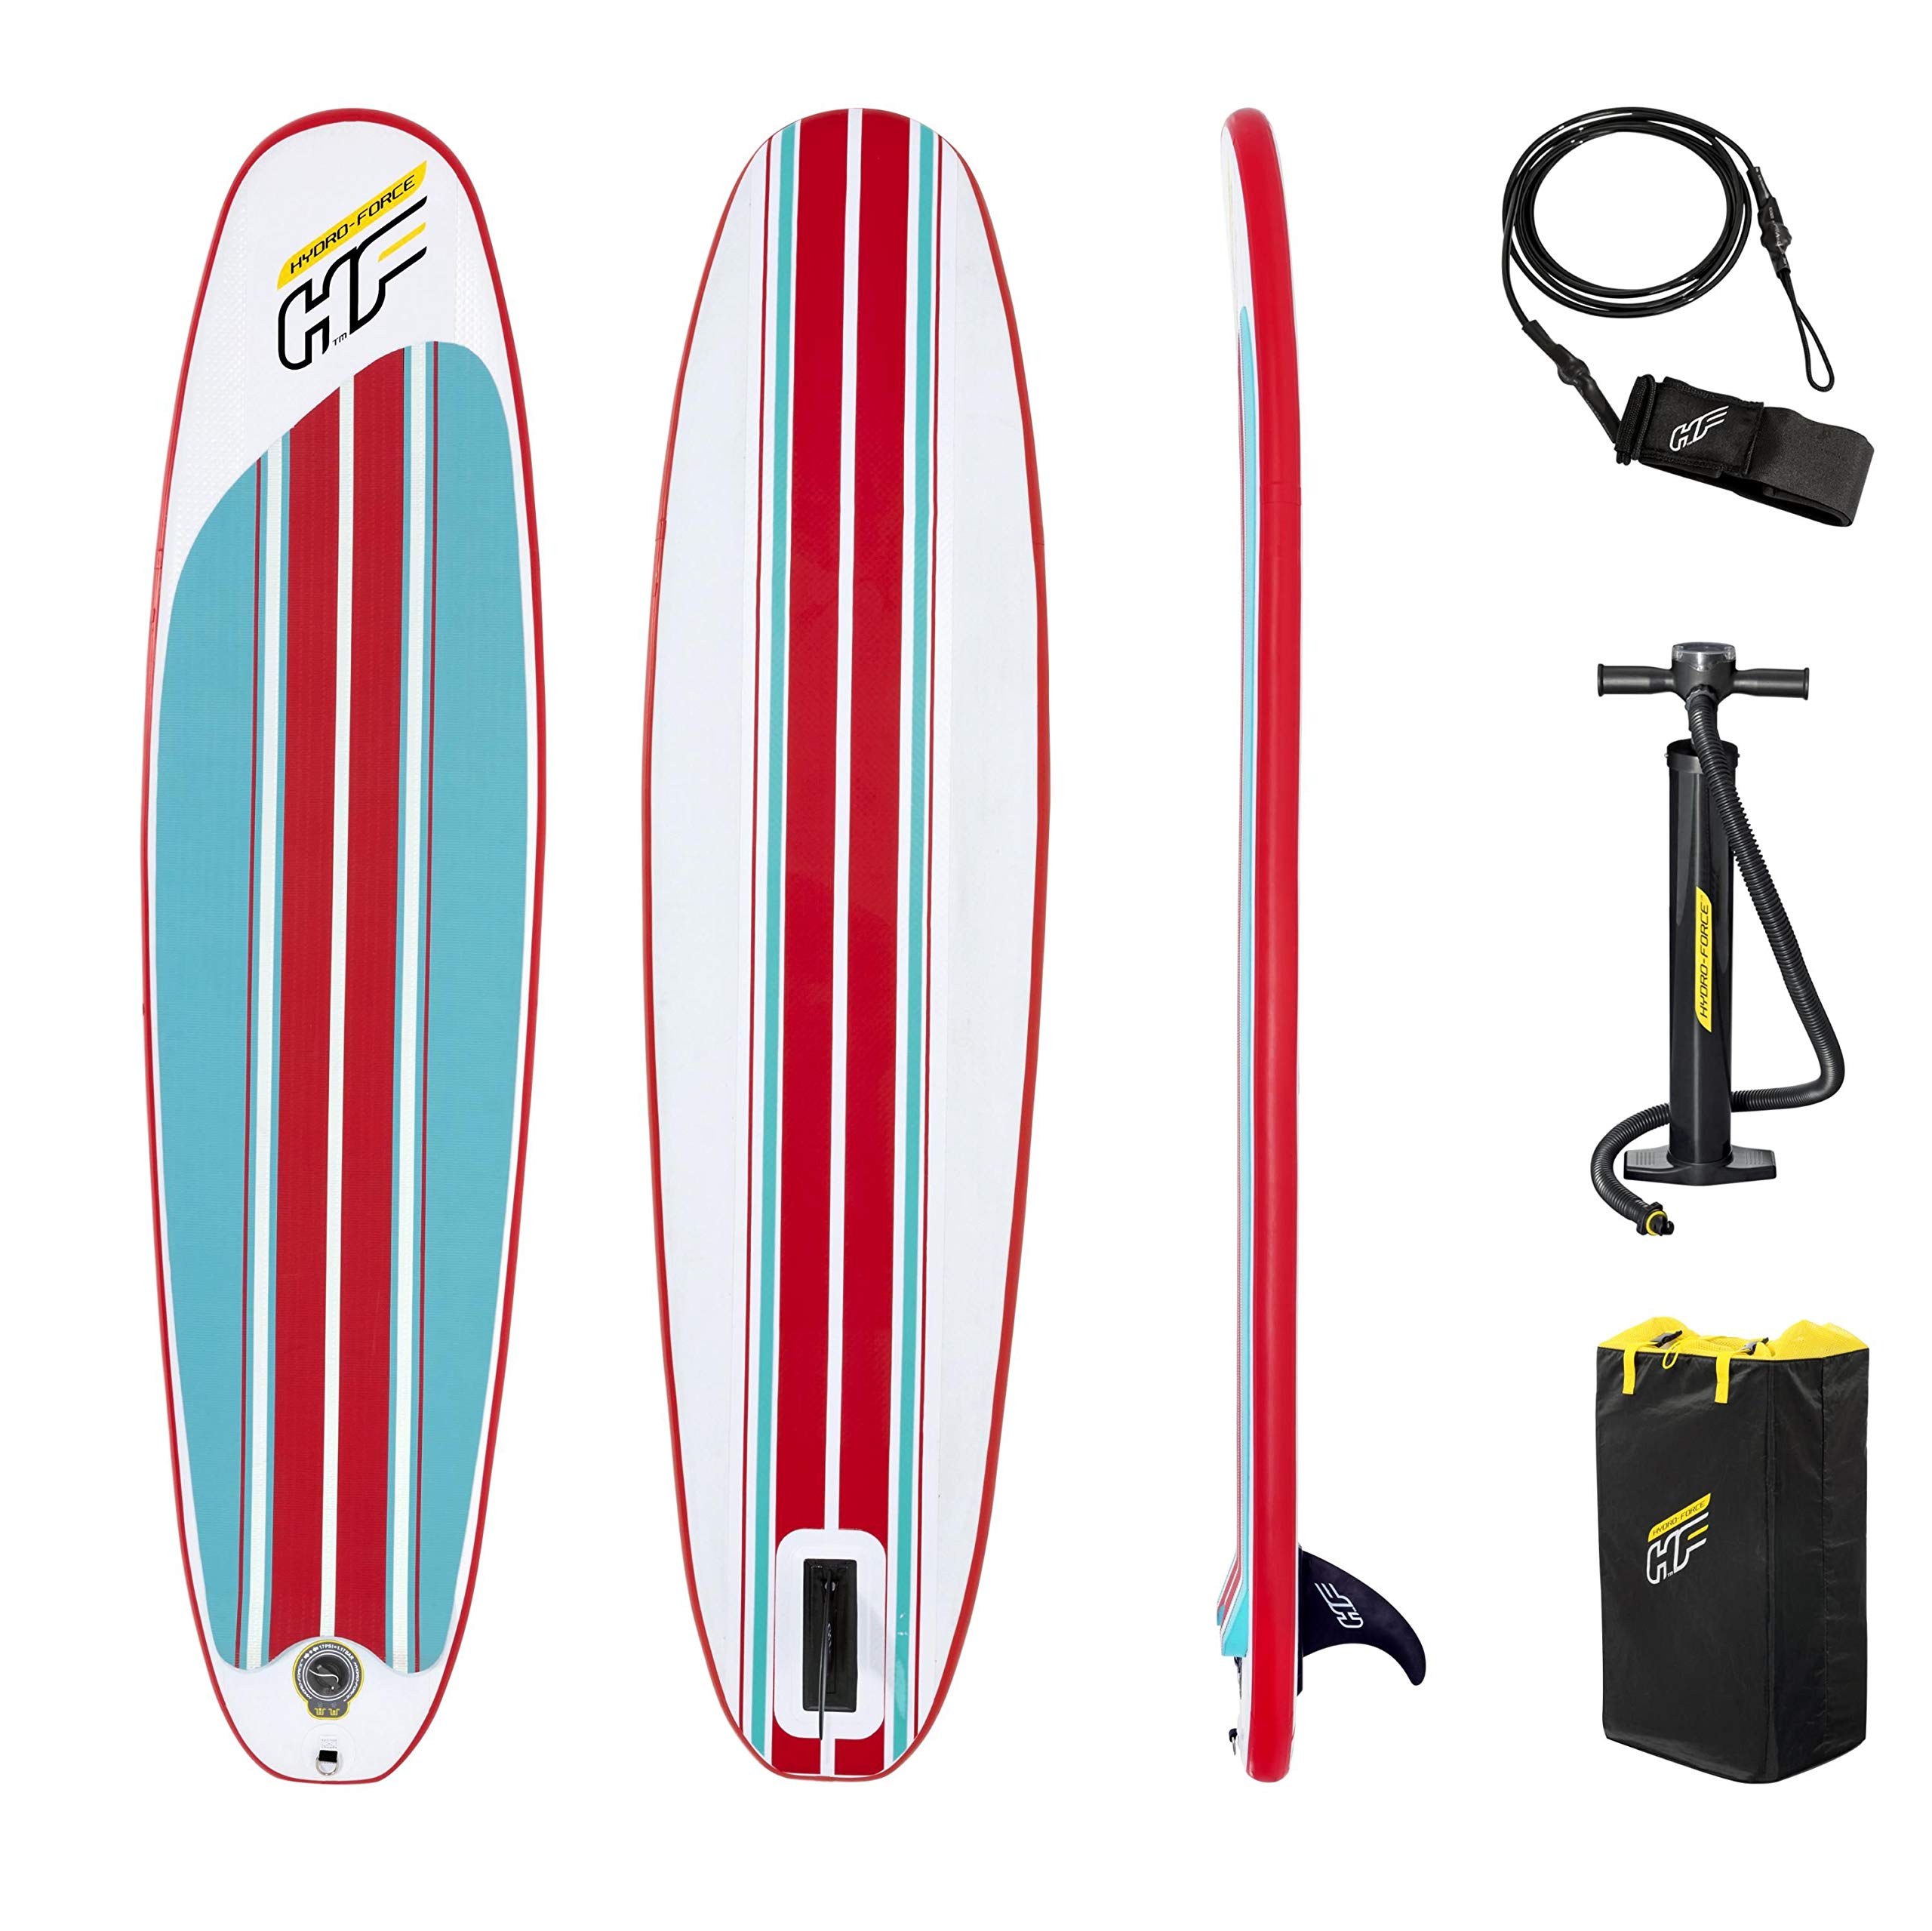 Bestway Hydro-Force™ SUP Surfboard-Set, Compact Surf, 243 x 57 x 7 cm